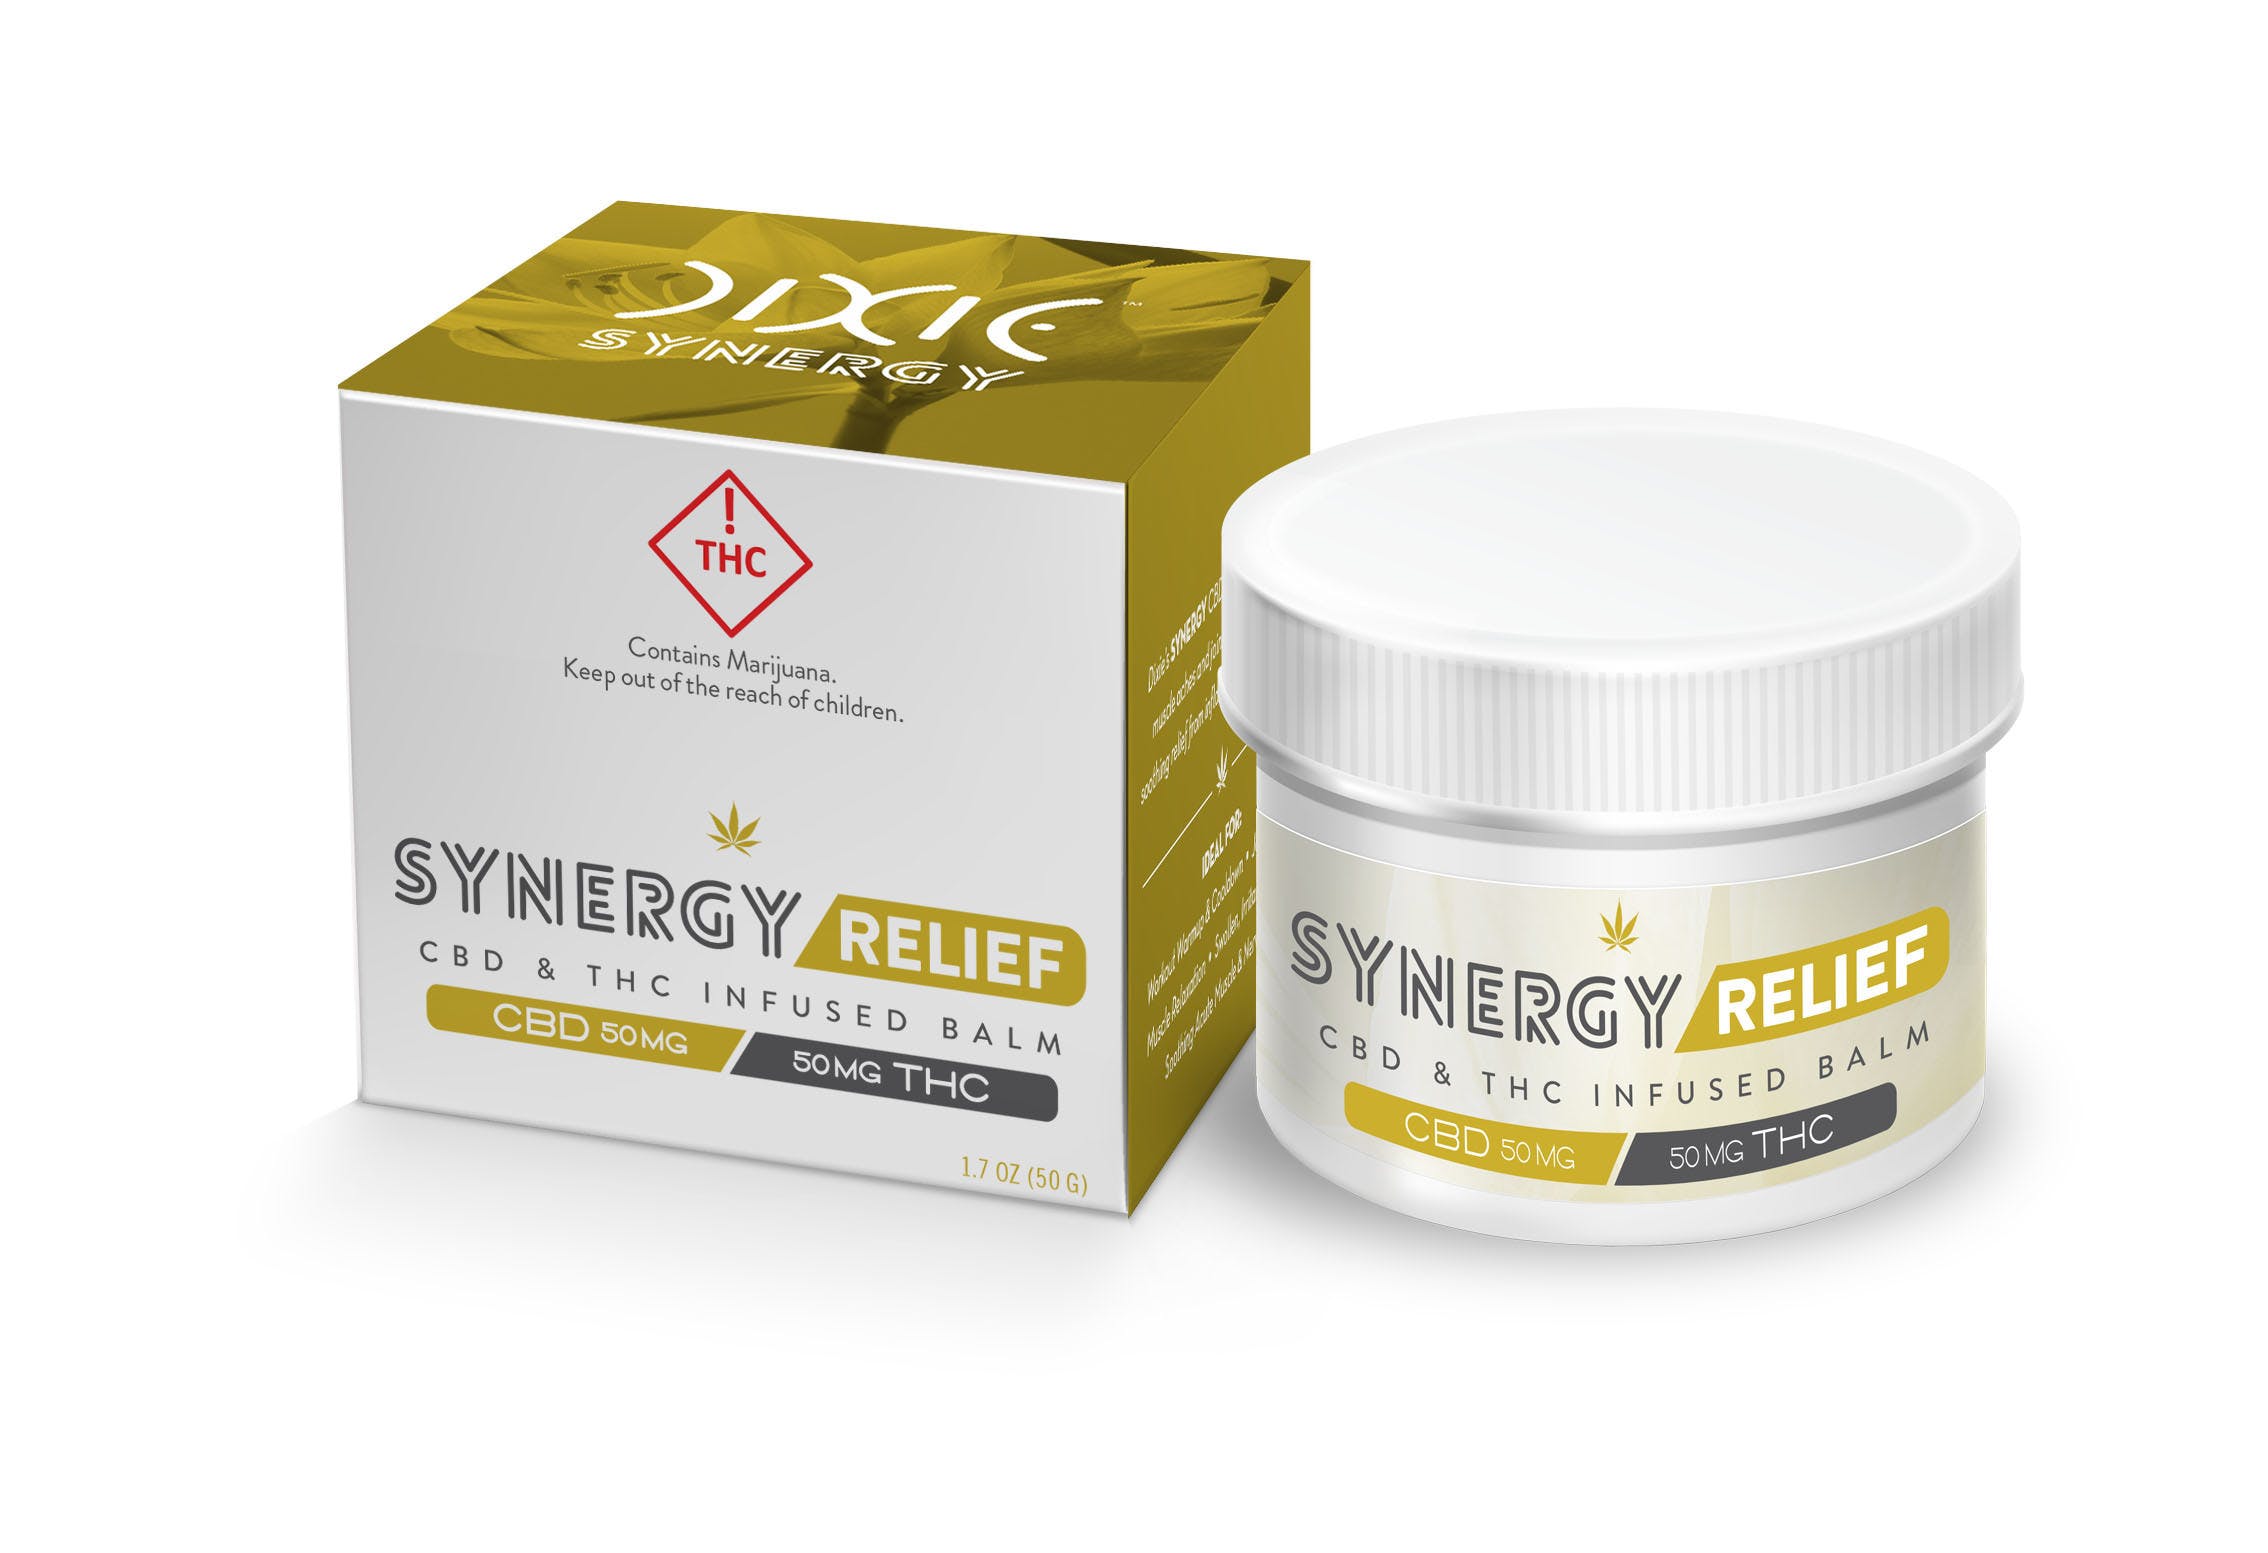 topicals-dixie-synergy-relief-balm-11